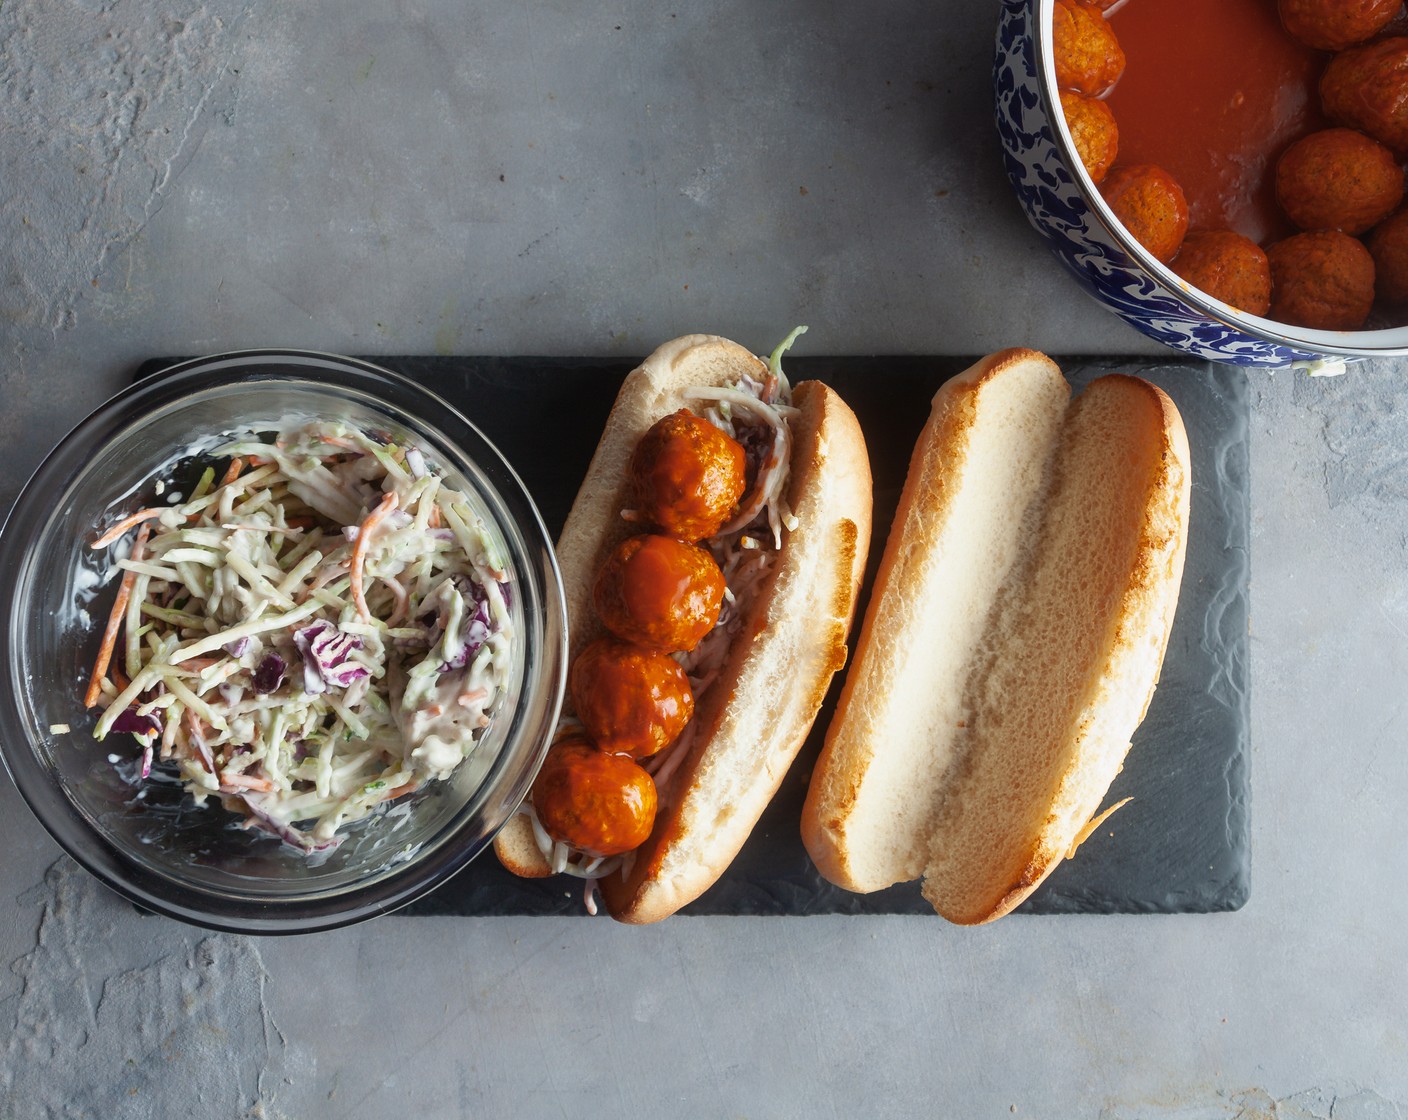 step 5 To assemble, add ¼ cup of slaw to each sub roll. Top with meatballs. Serve remaining slaw on the side.